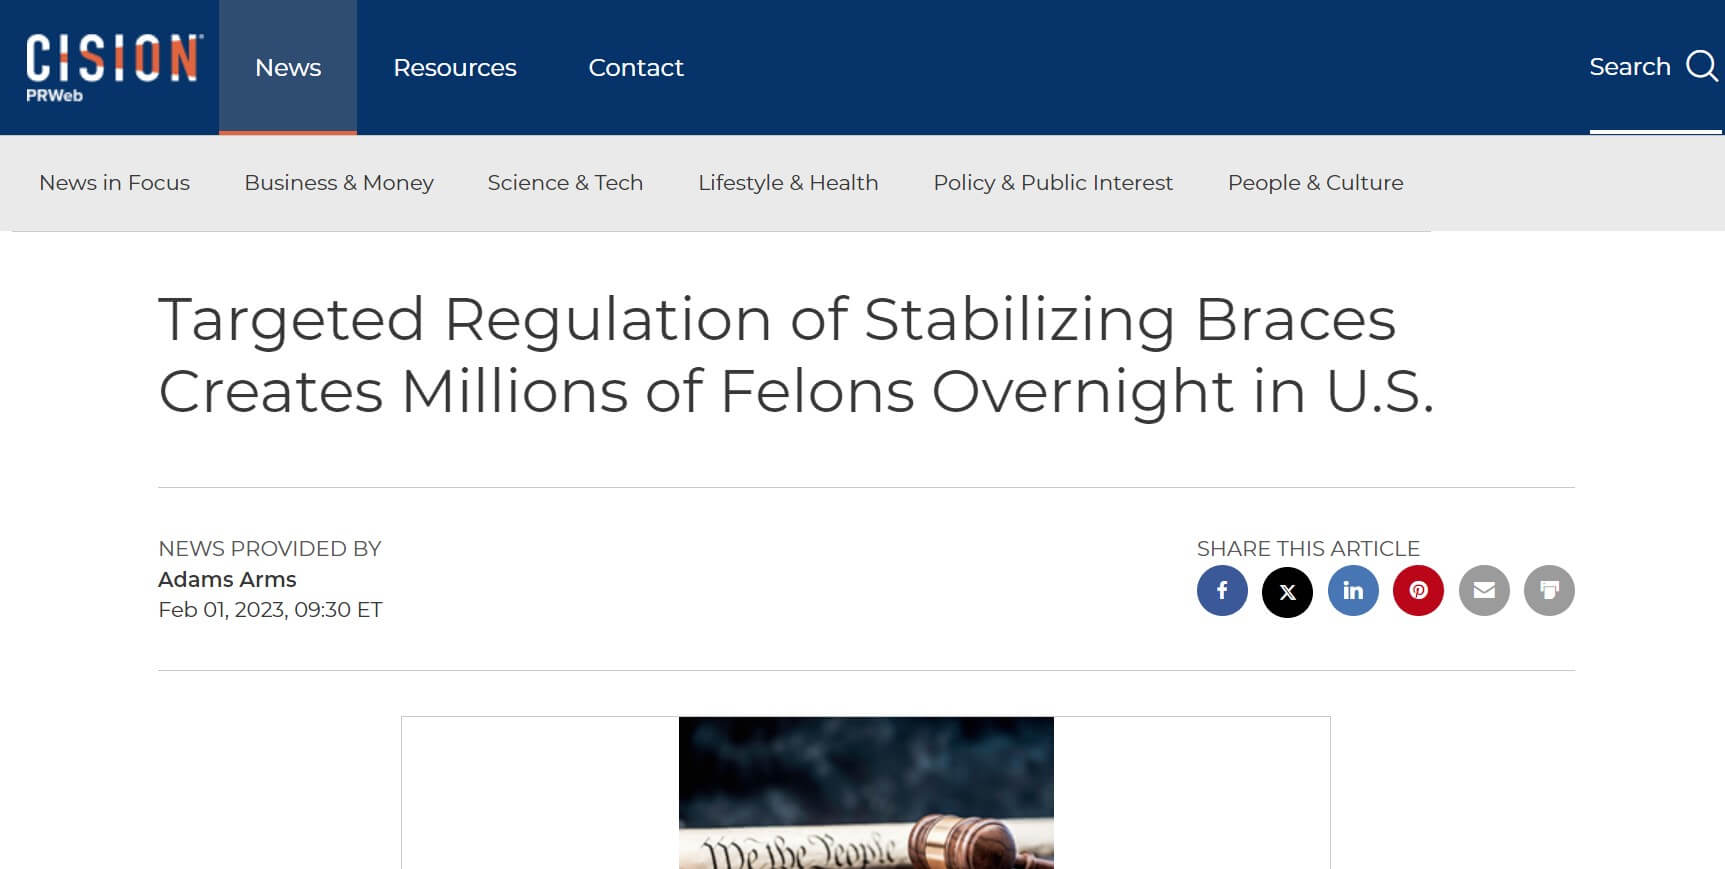 Screen capture of Cision news article: "Targeted Regulation of Stabilizing Braces Creates Millions of Felons Overnight in U.S."